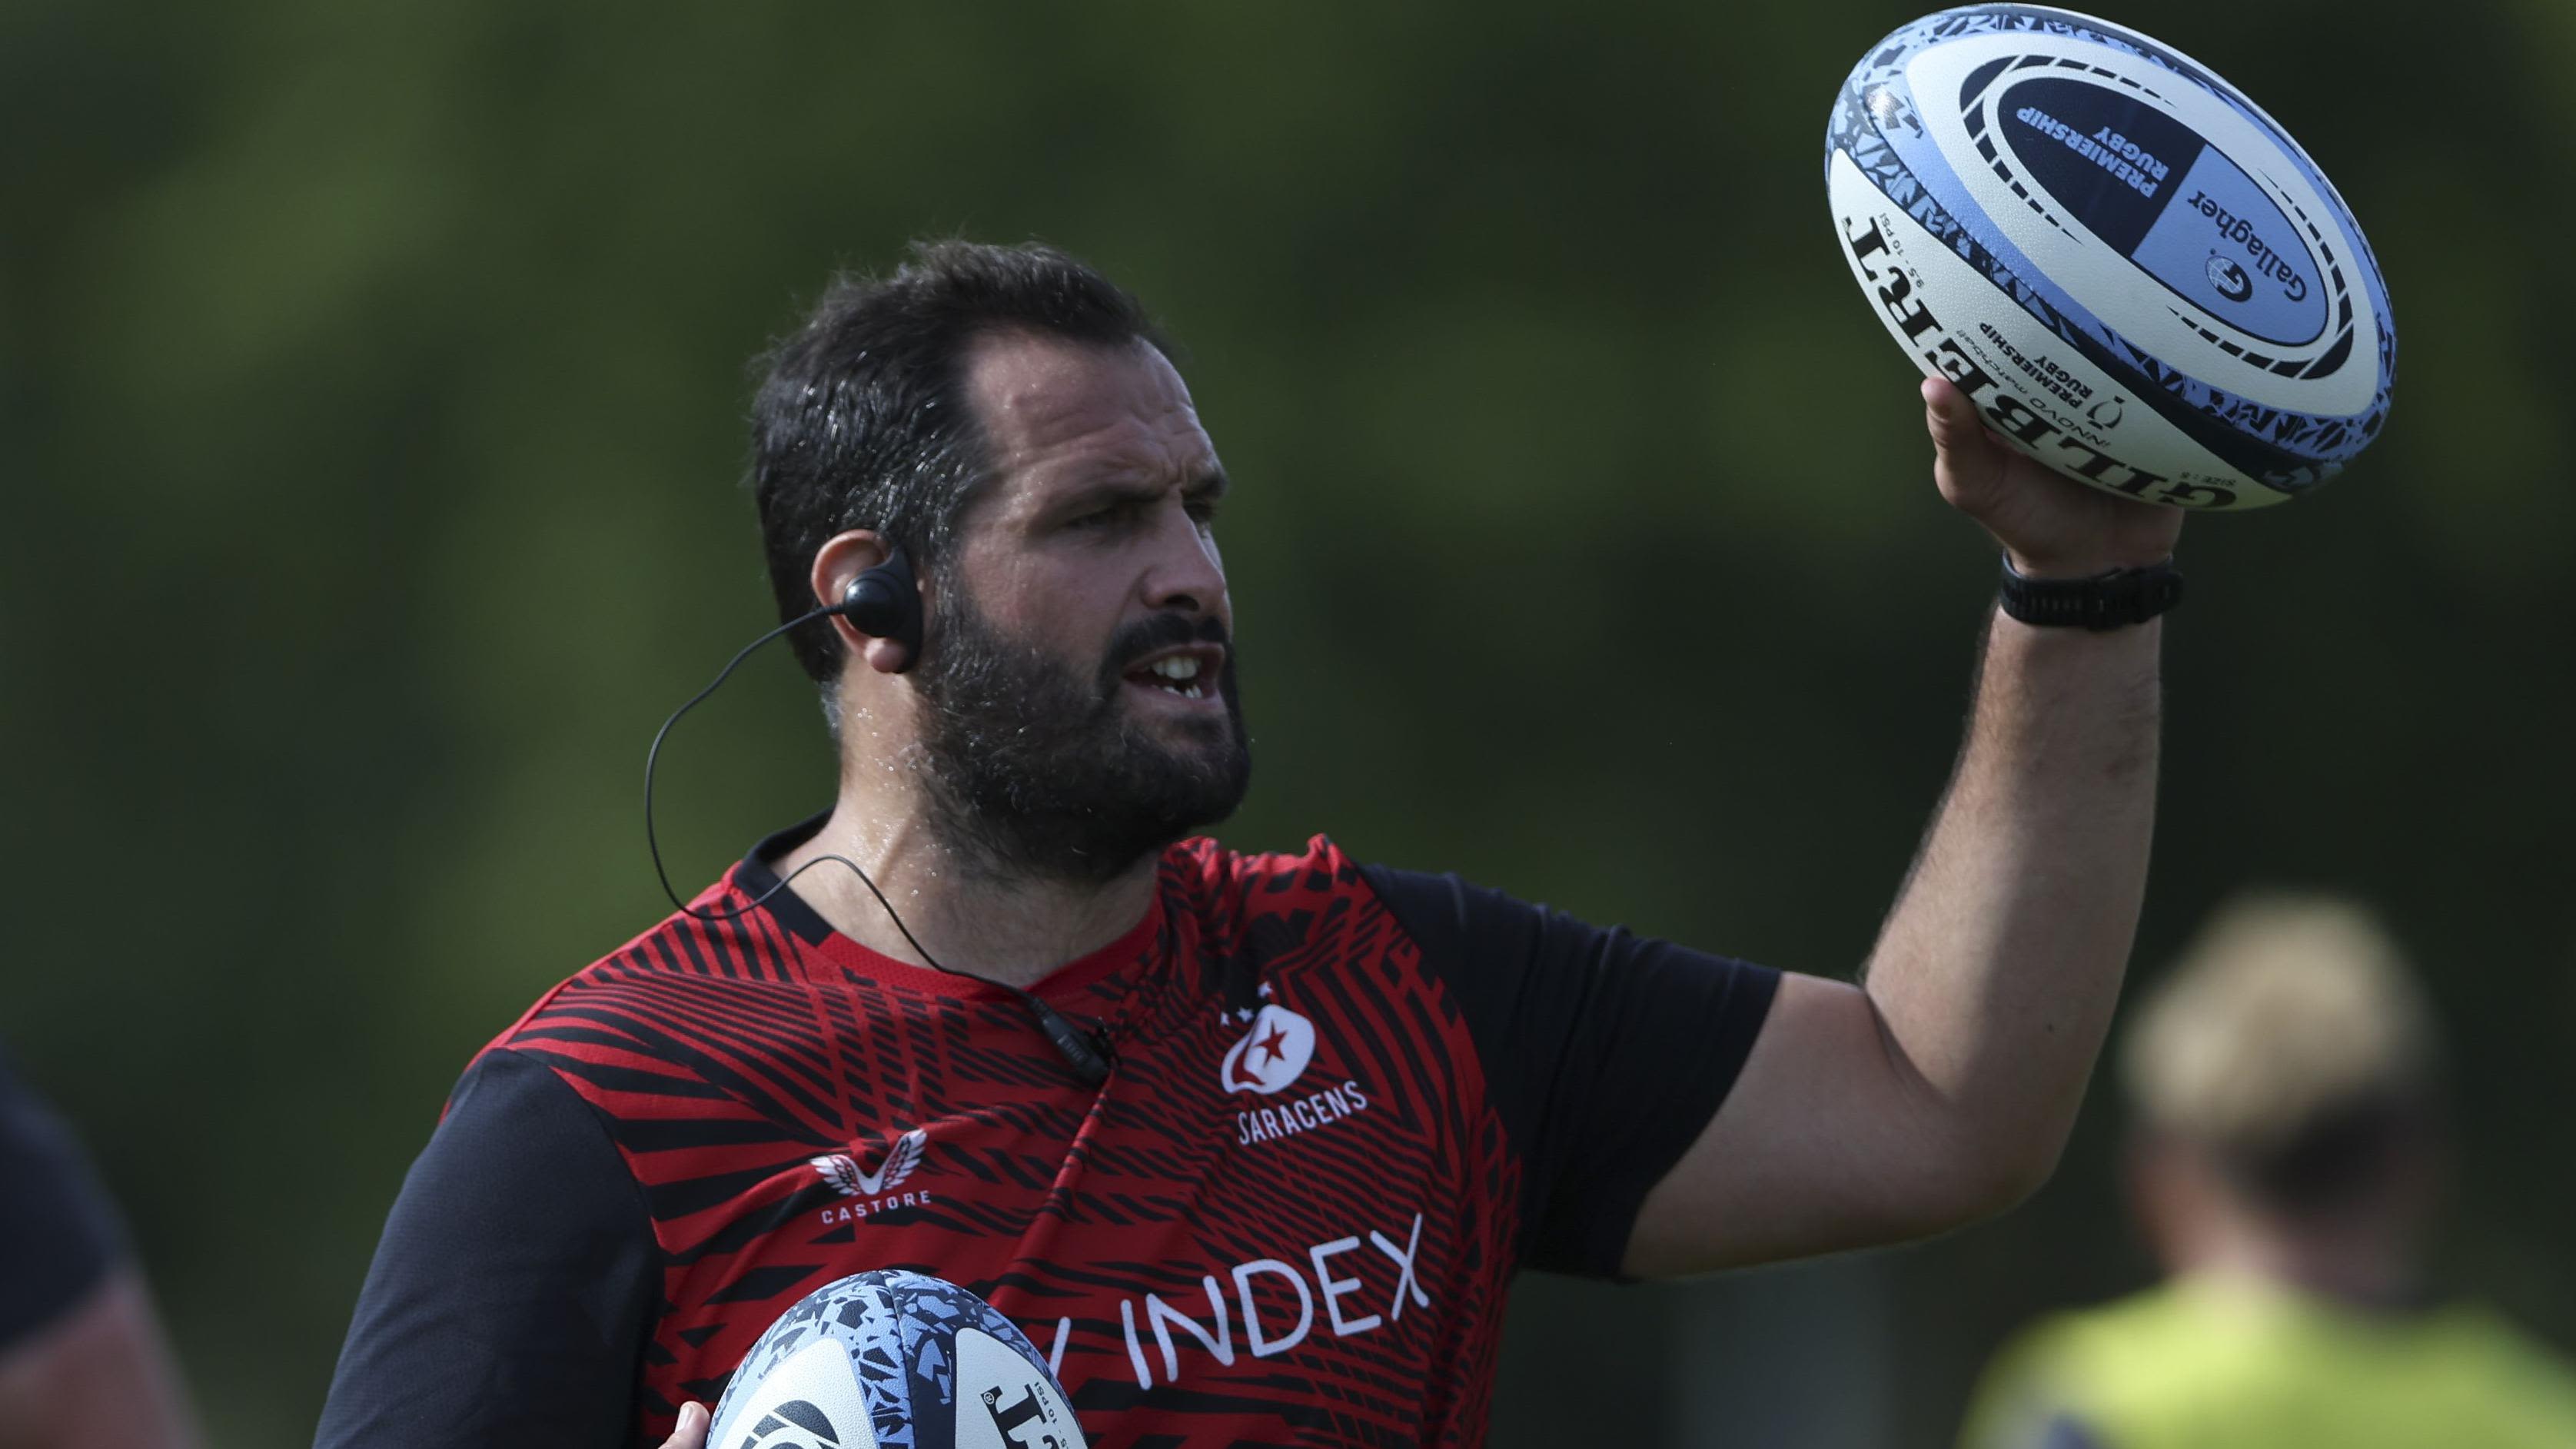 Coach Figallo to leave Saracens at end of season